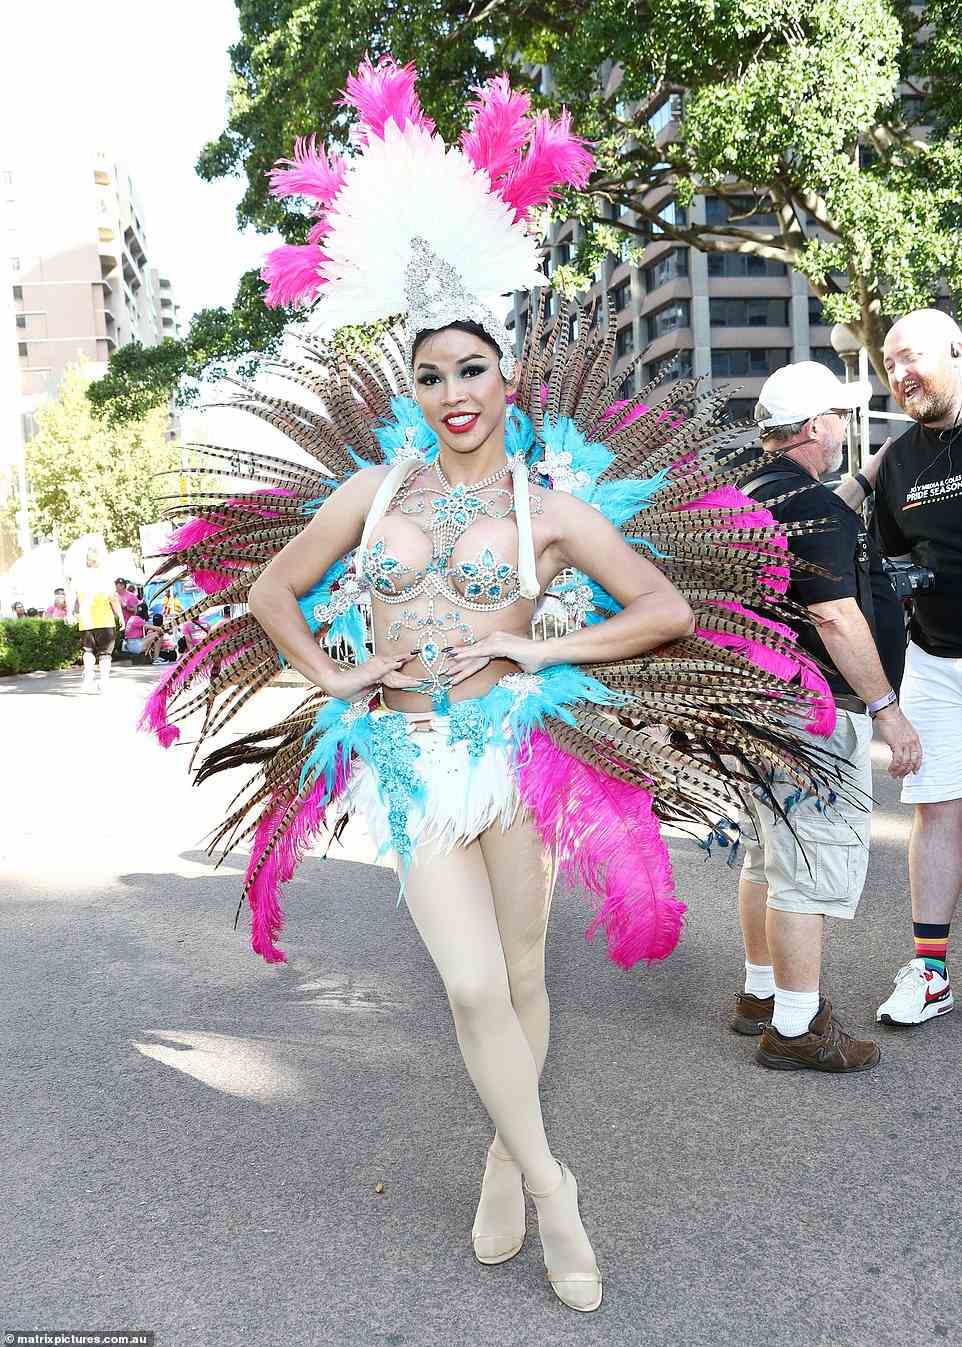 Some paradegoers opted for full carnival gear as they stunned Sydney's CBD